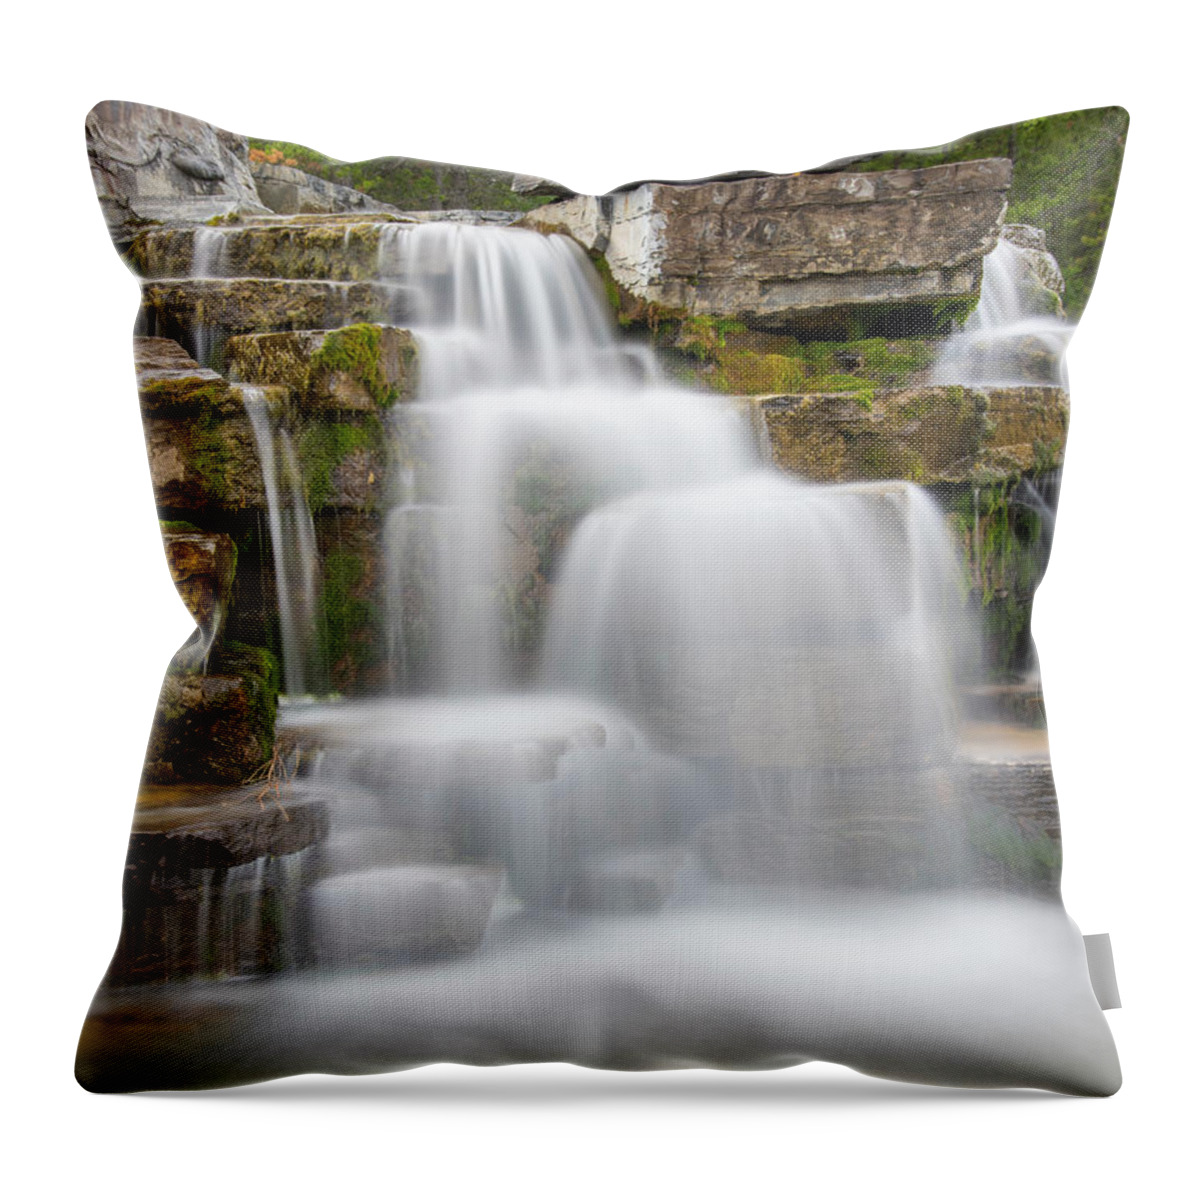 Water Throw Pillow featuring the photograph Waterfalls and Stones by Bill Cubitt